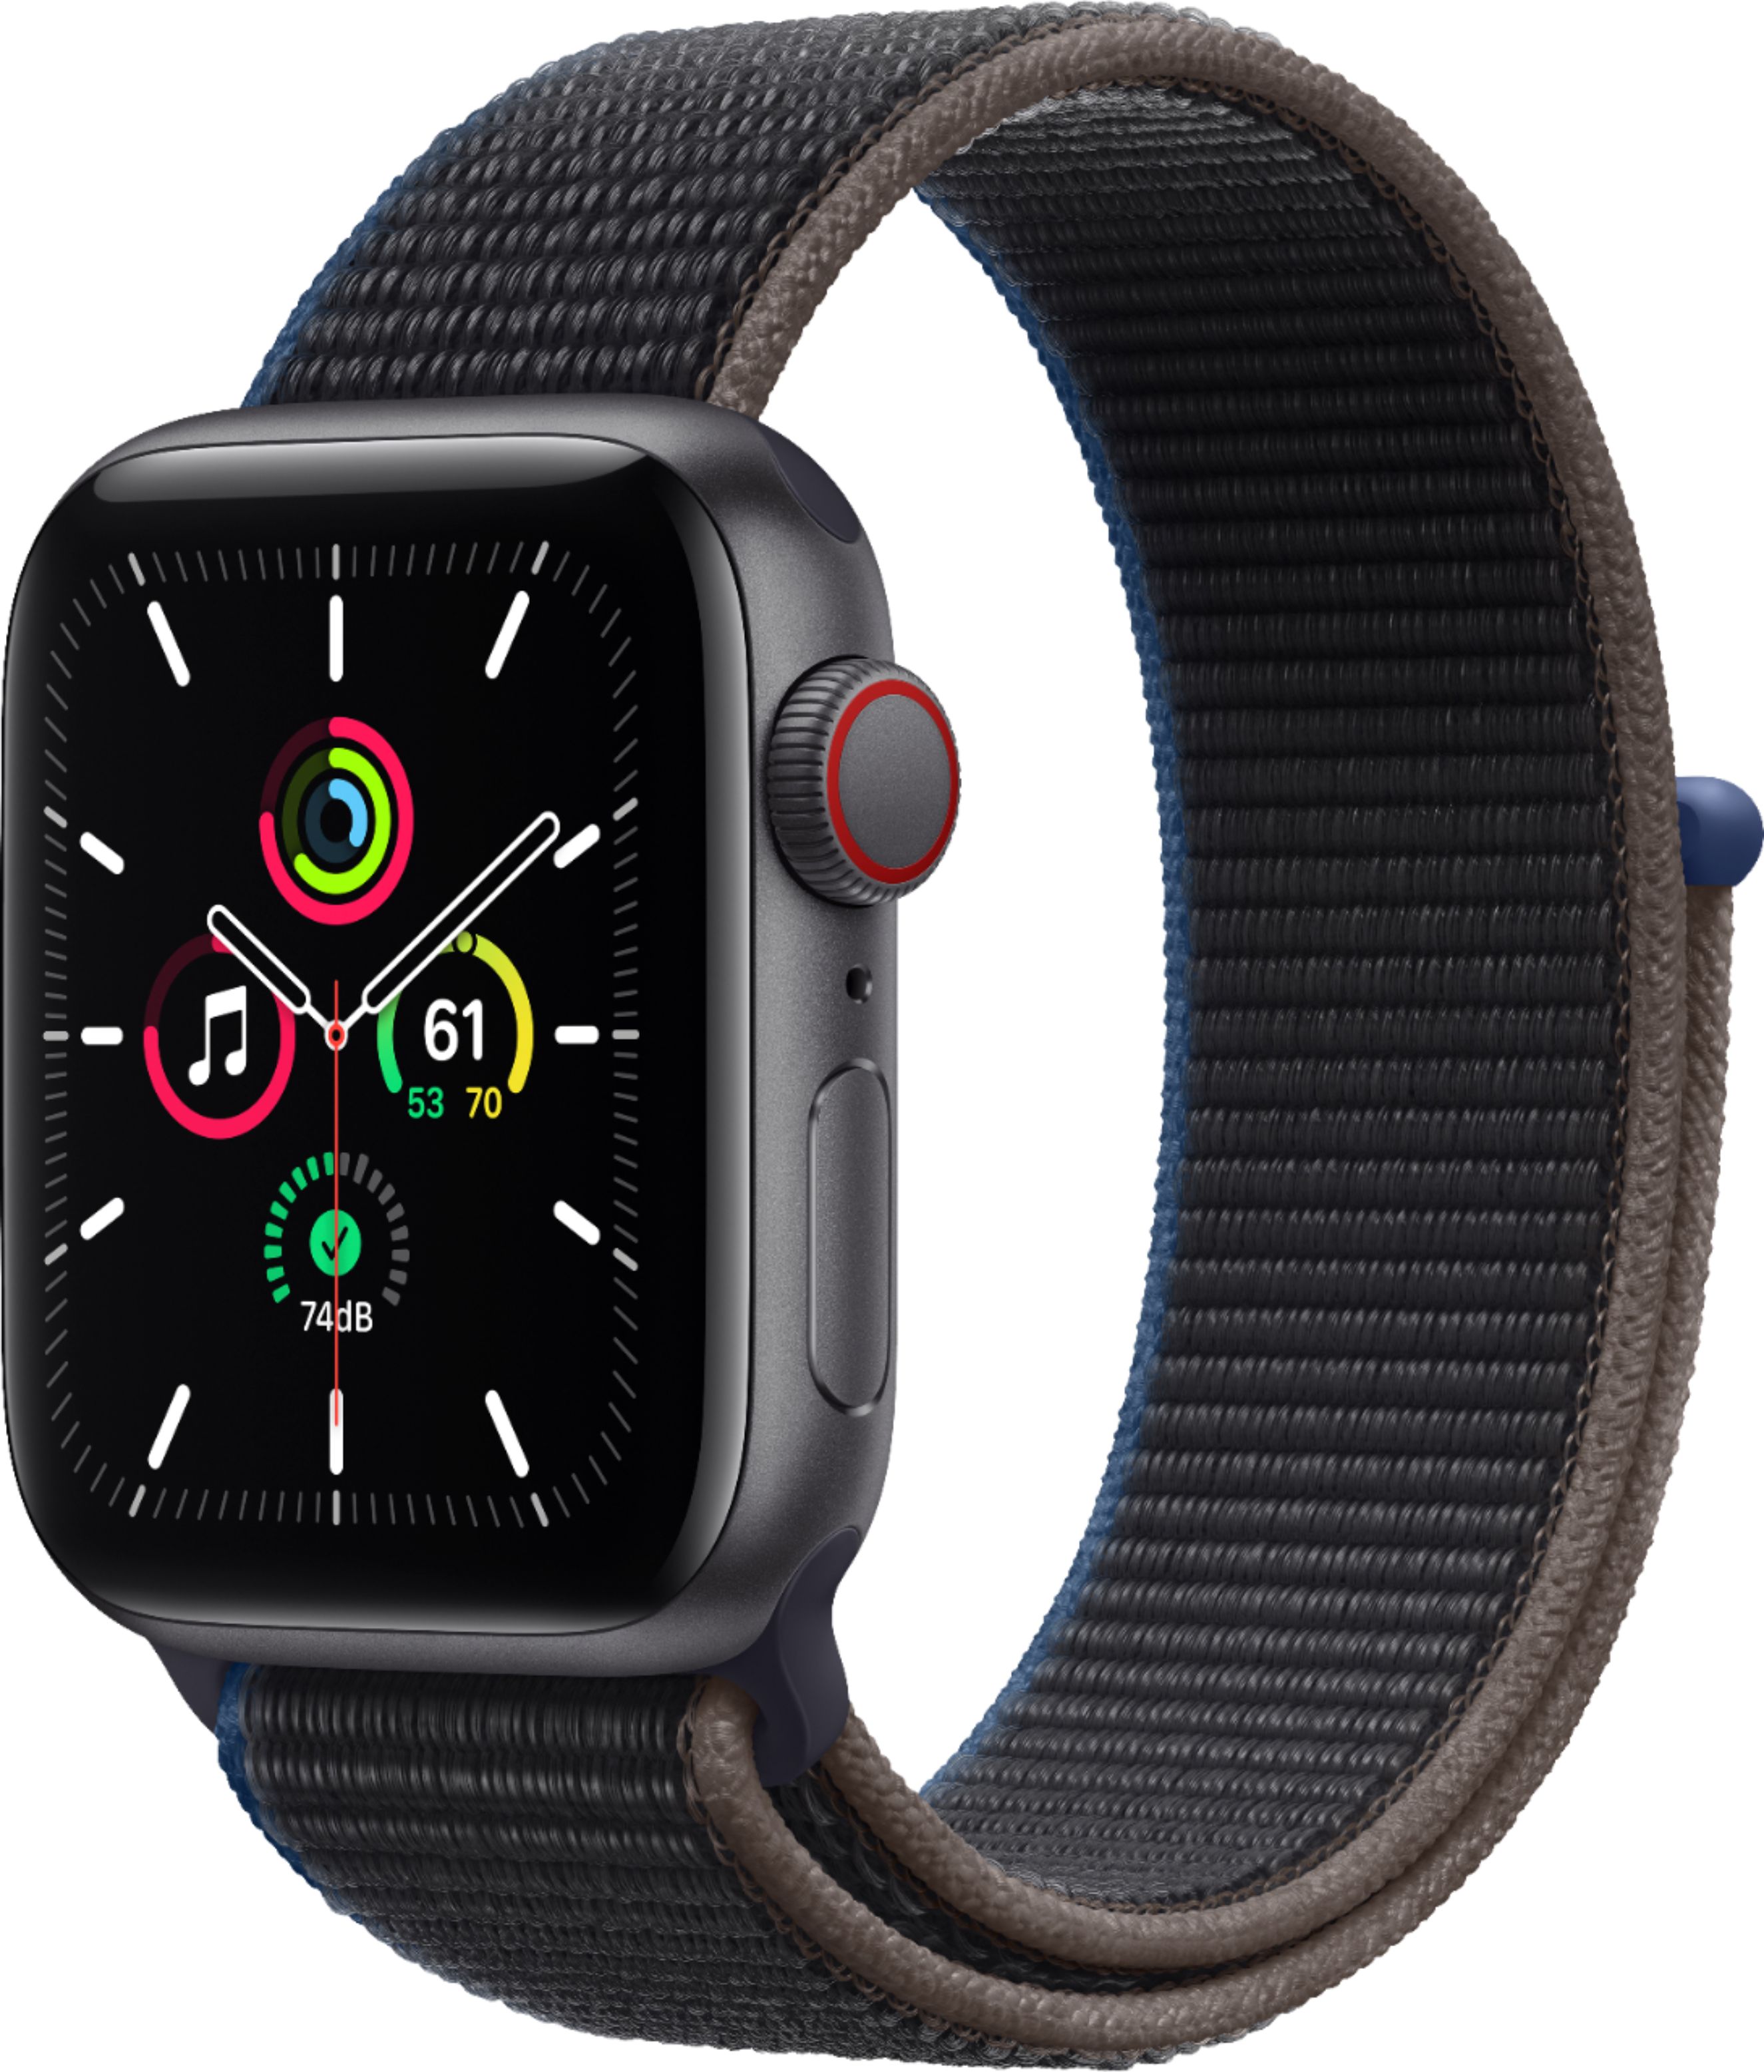 Apple Watch SE (GPS + Cellular) 40mm Space Gray Aluminum Case with Charcoal Sport Loop - Space Gray (Verizon)